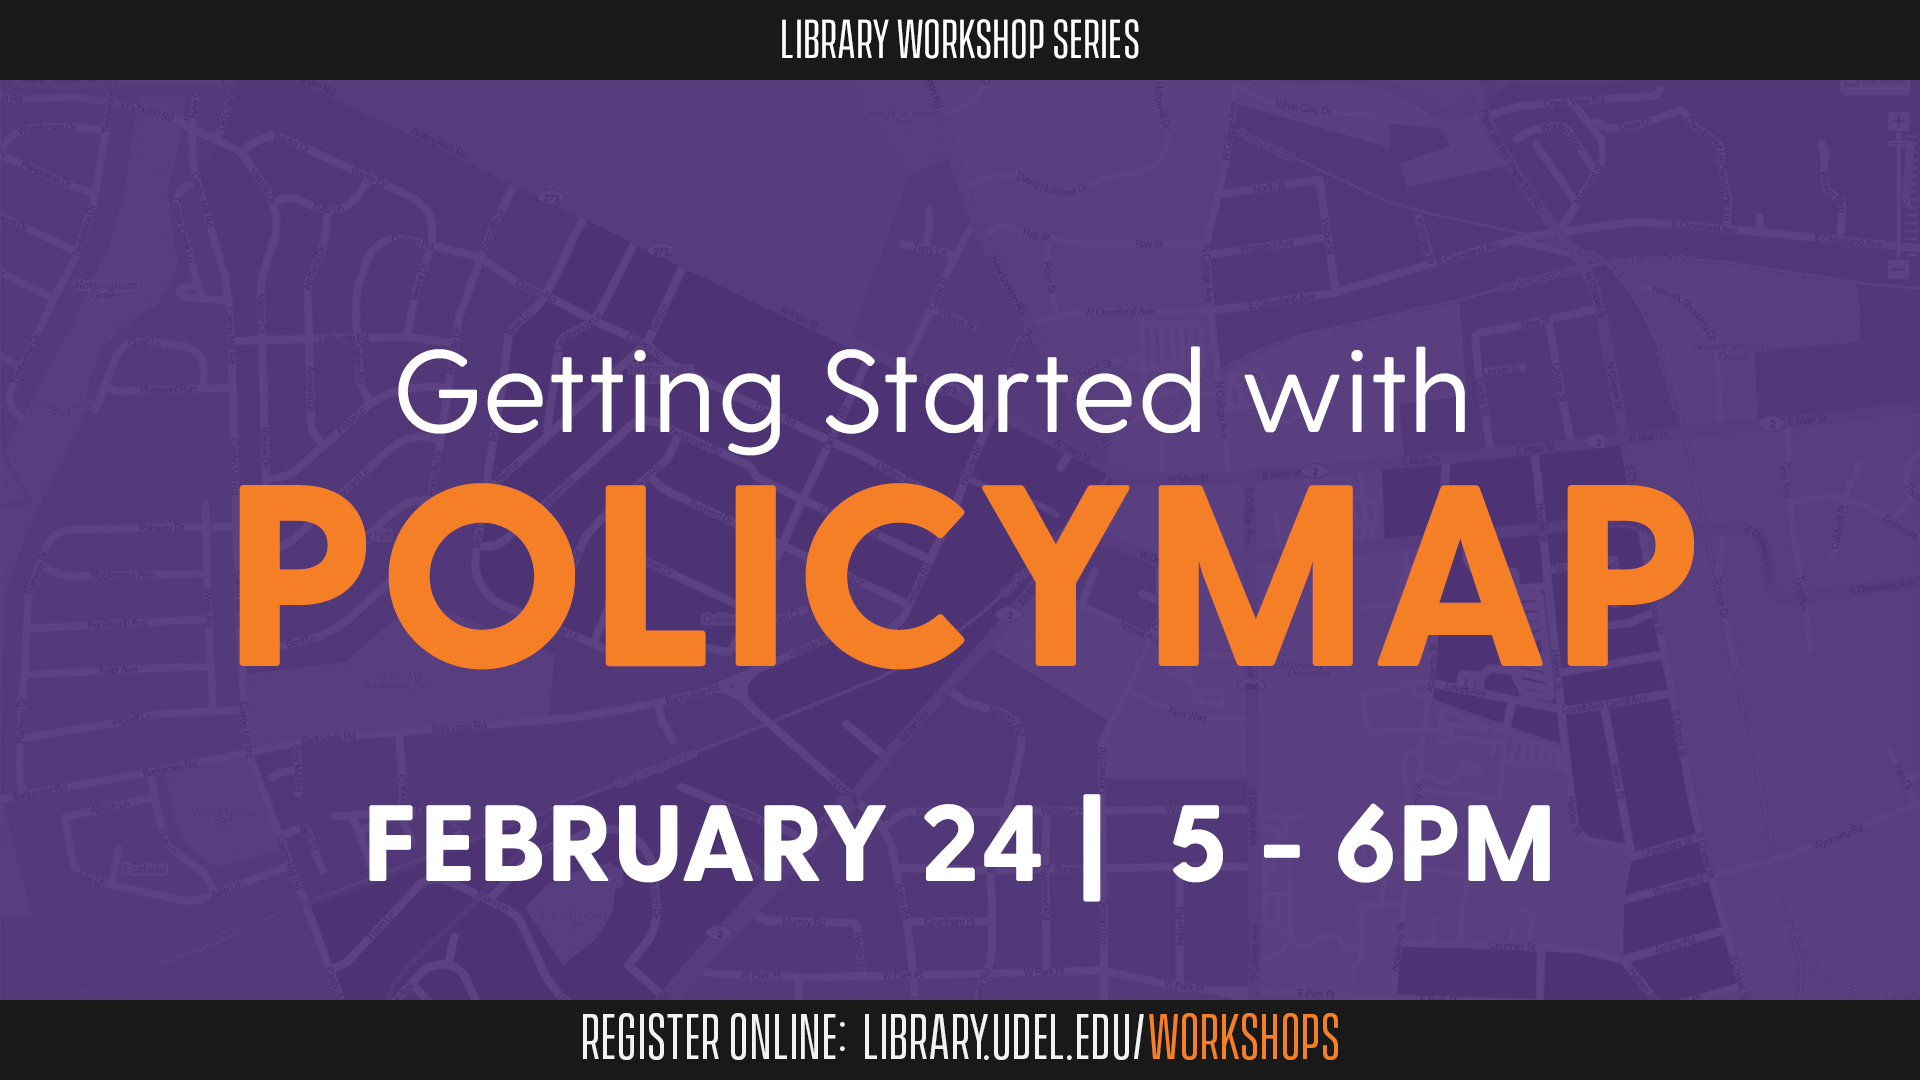 Promotional image for Getting Started with PolicyMap